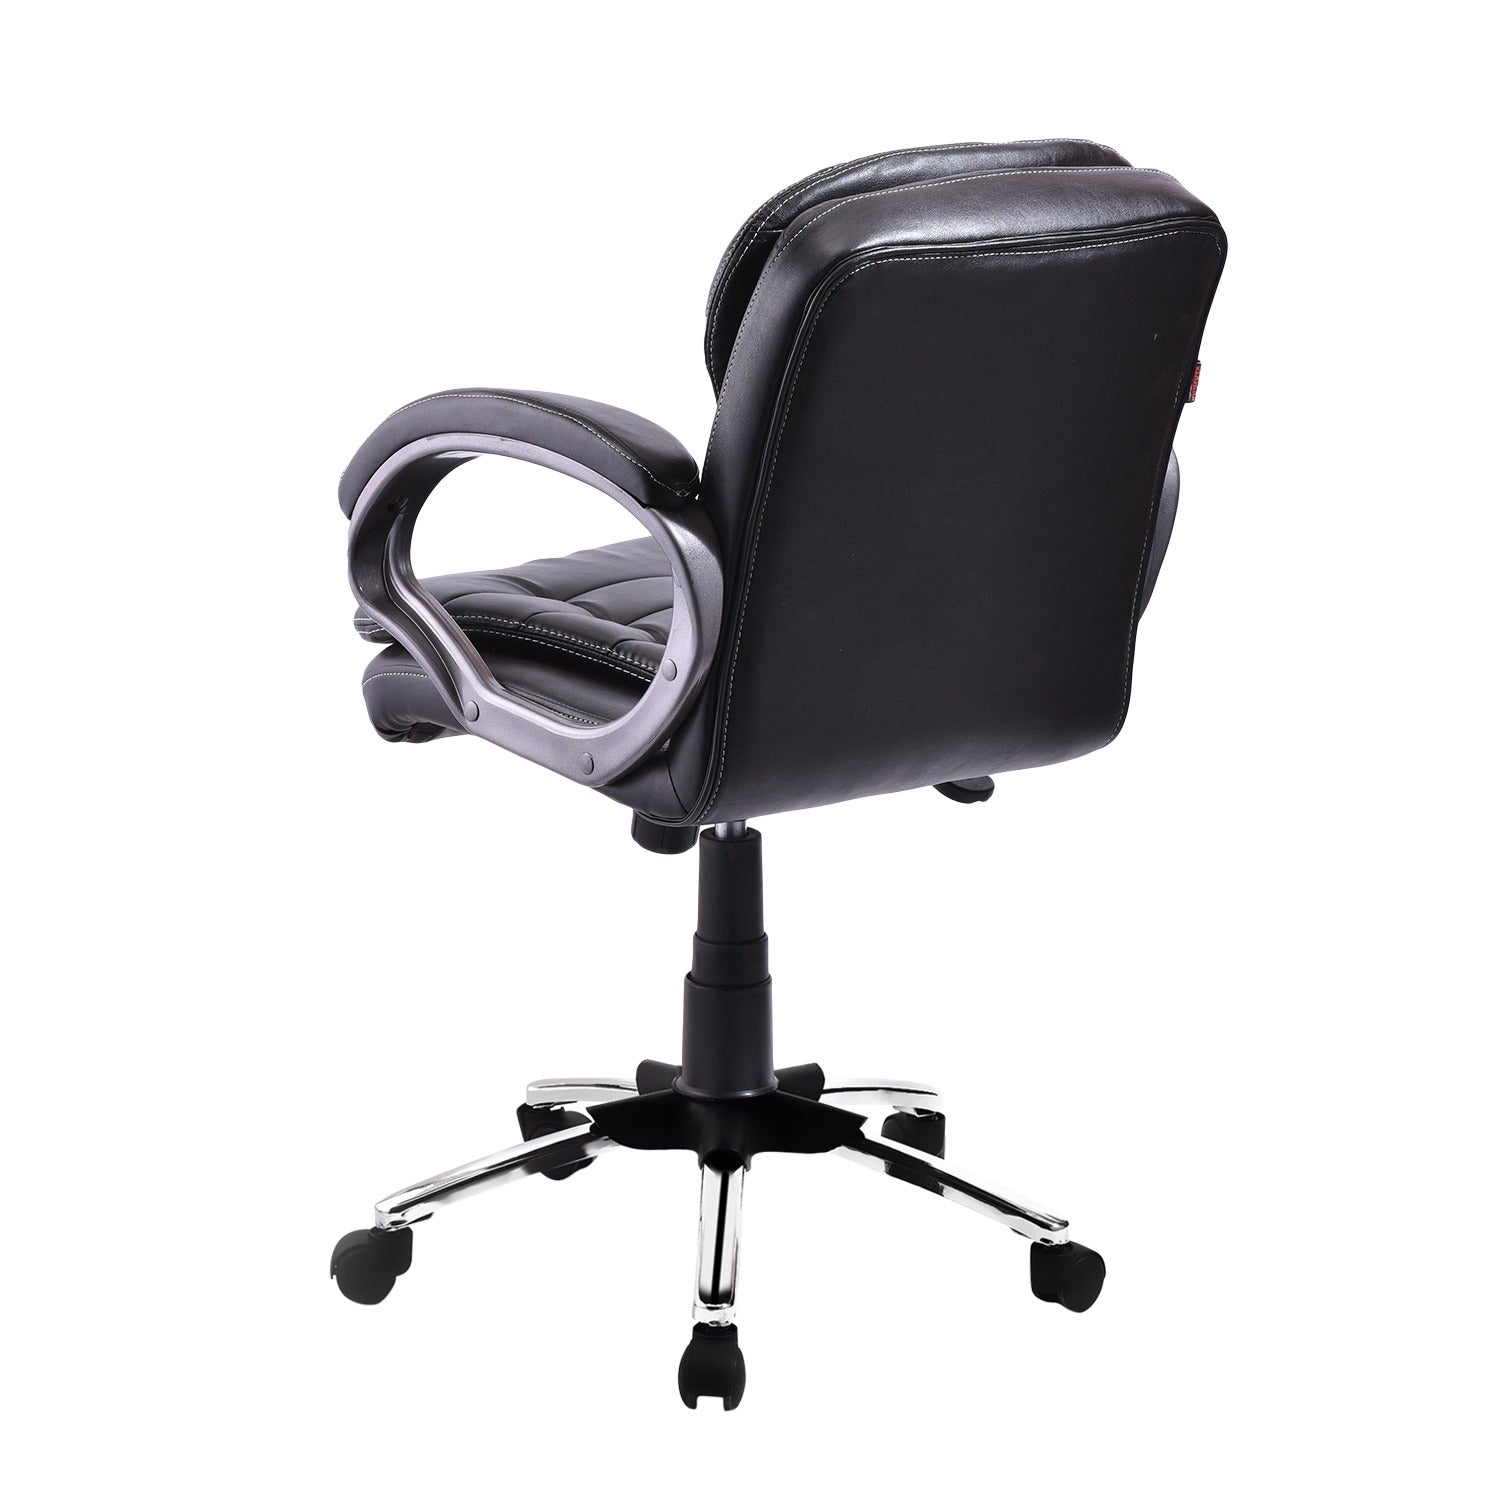 ZSE1030 Medium Back Chair by Zorin in Black Color Zorin